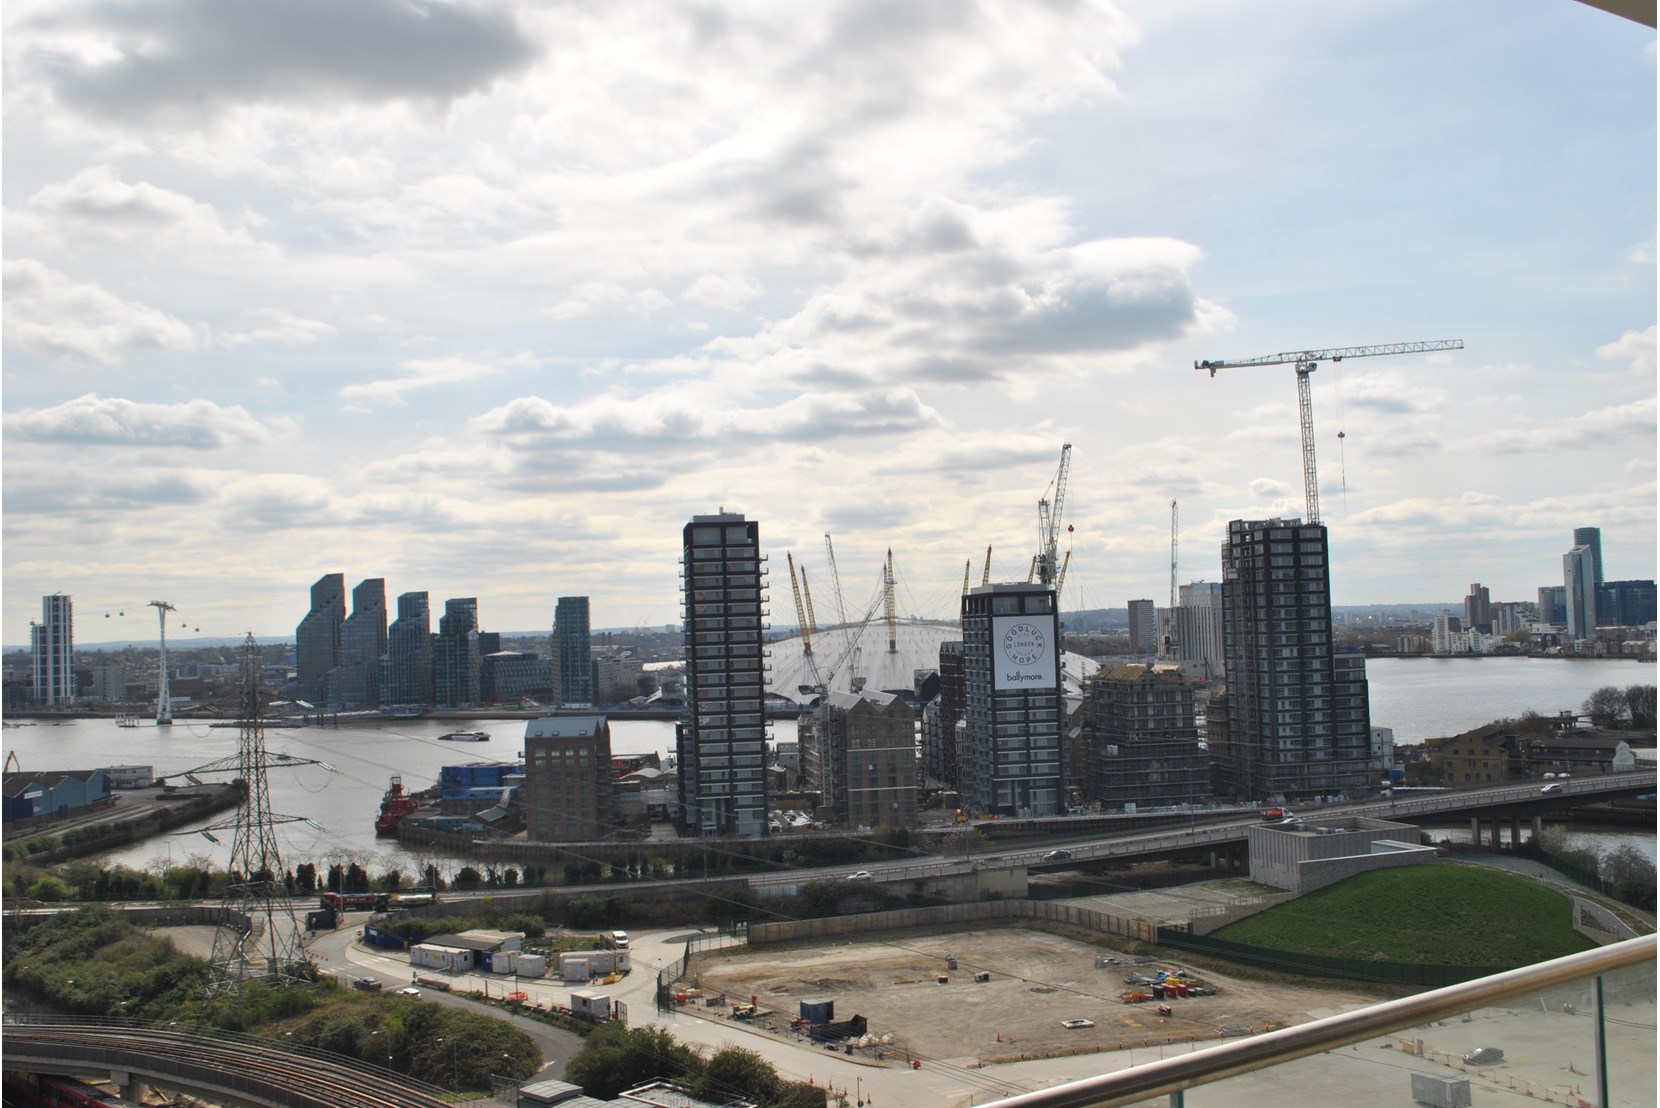 Apartments to Rent by Fizzy Living at Fizzy East 16, Newham, E16, development panoramic view